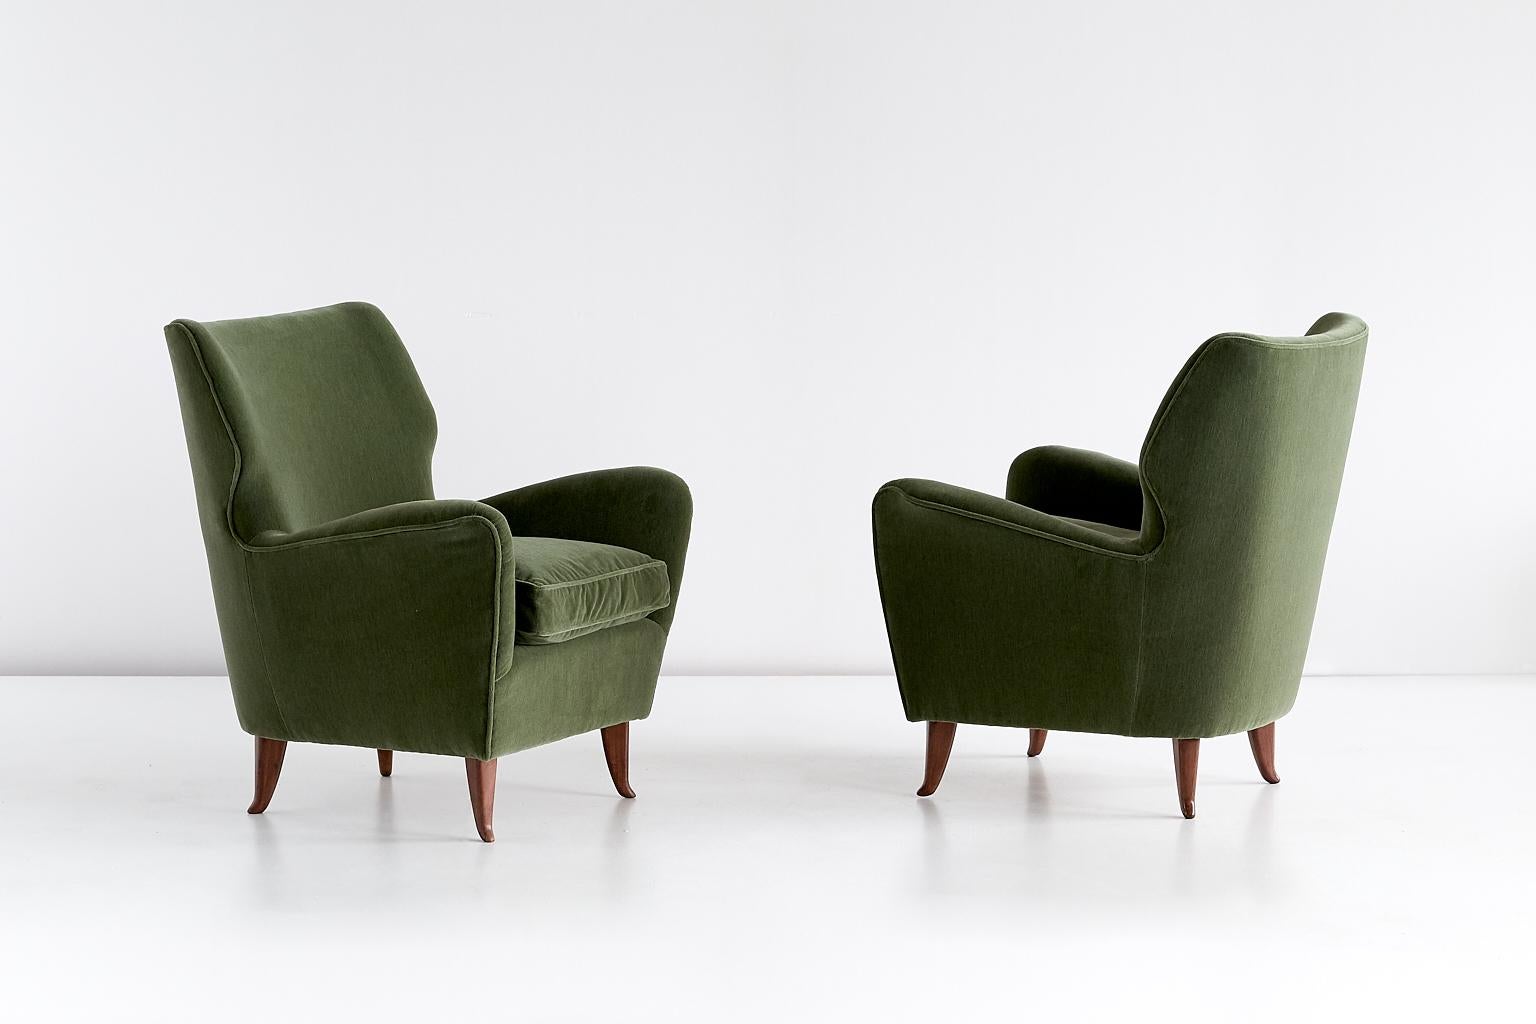 This pair of armchairs was designed by Gio Ponti in 1949. This particular model was manufactured for the Hotel Bristol in Merano, Italy. 
The rounded lines and the curved, tapered legs in walnut wood give the chair a refined appearance. The chairs